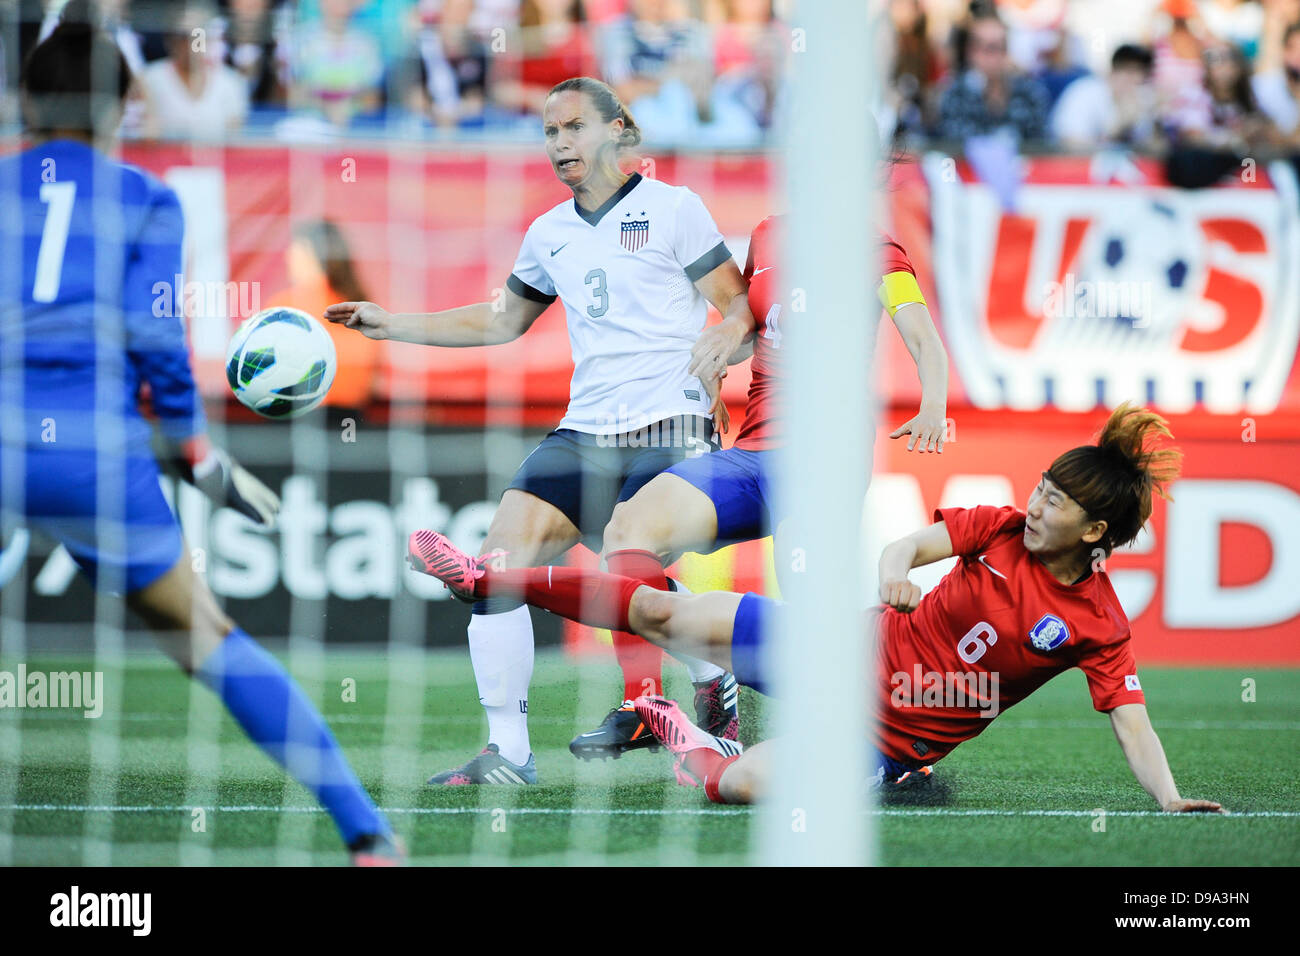 Foxborough, Massachusetts, USA. 15th June, 2013. Korea Republic defender Lim Seonjoo (6) makes a diving save and strips the ball from US Women's National defender Christie Rampone (3) during the International Friendly soccer match between the USA Women's National team and the Korea Republic Women's Team held at Gillette Stadium in Foxborough Massachusetts. Eric Canha/CSM Credit: csm/Alamy Live News Stock Photo